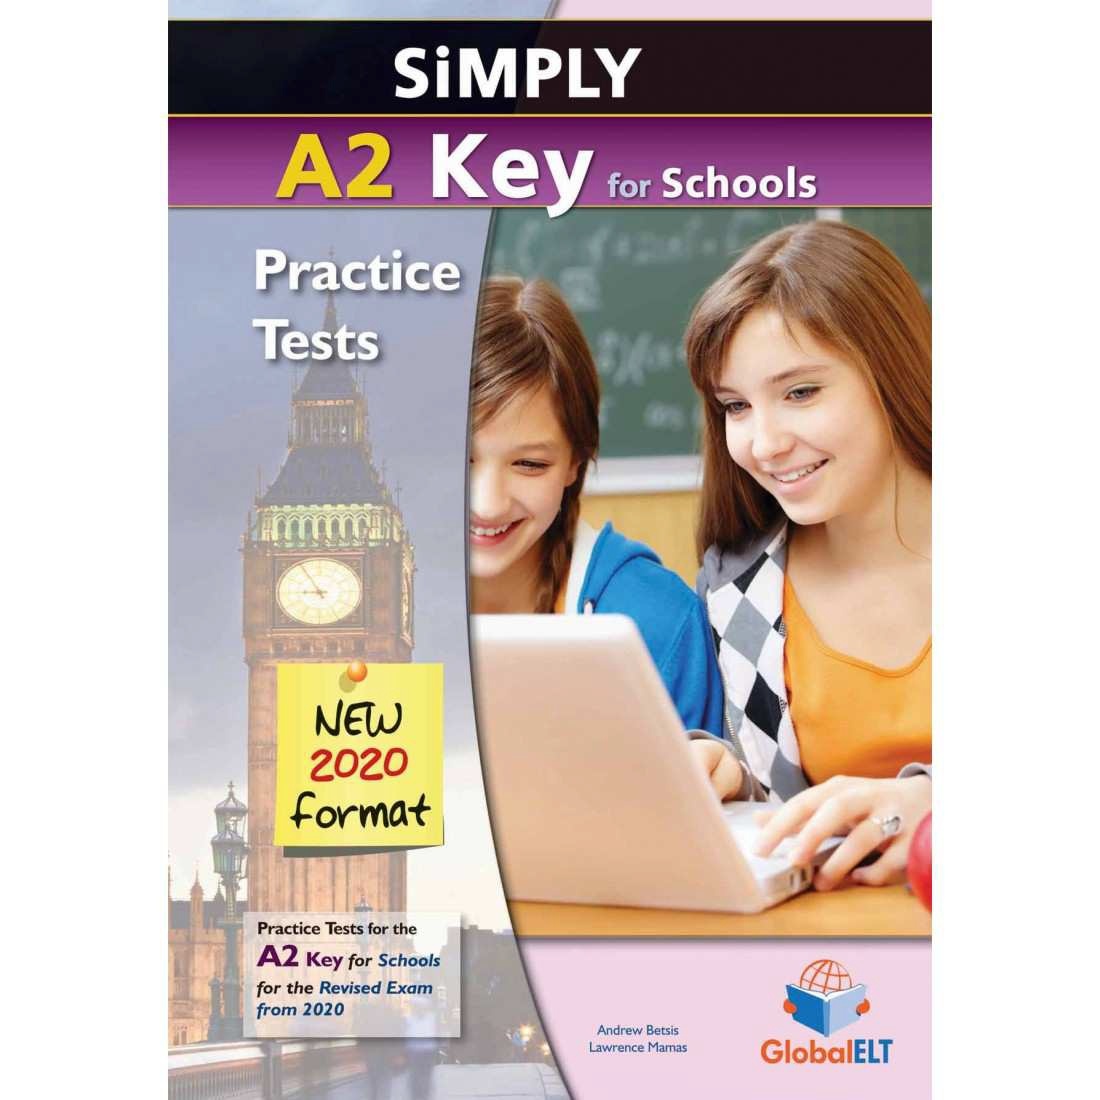 Simply A2 Key for Schools (new 2020 format) Self-Study edition